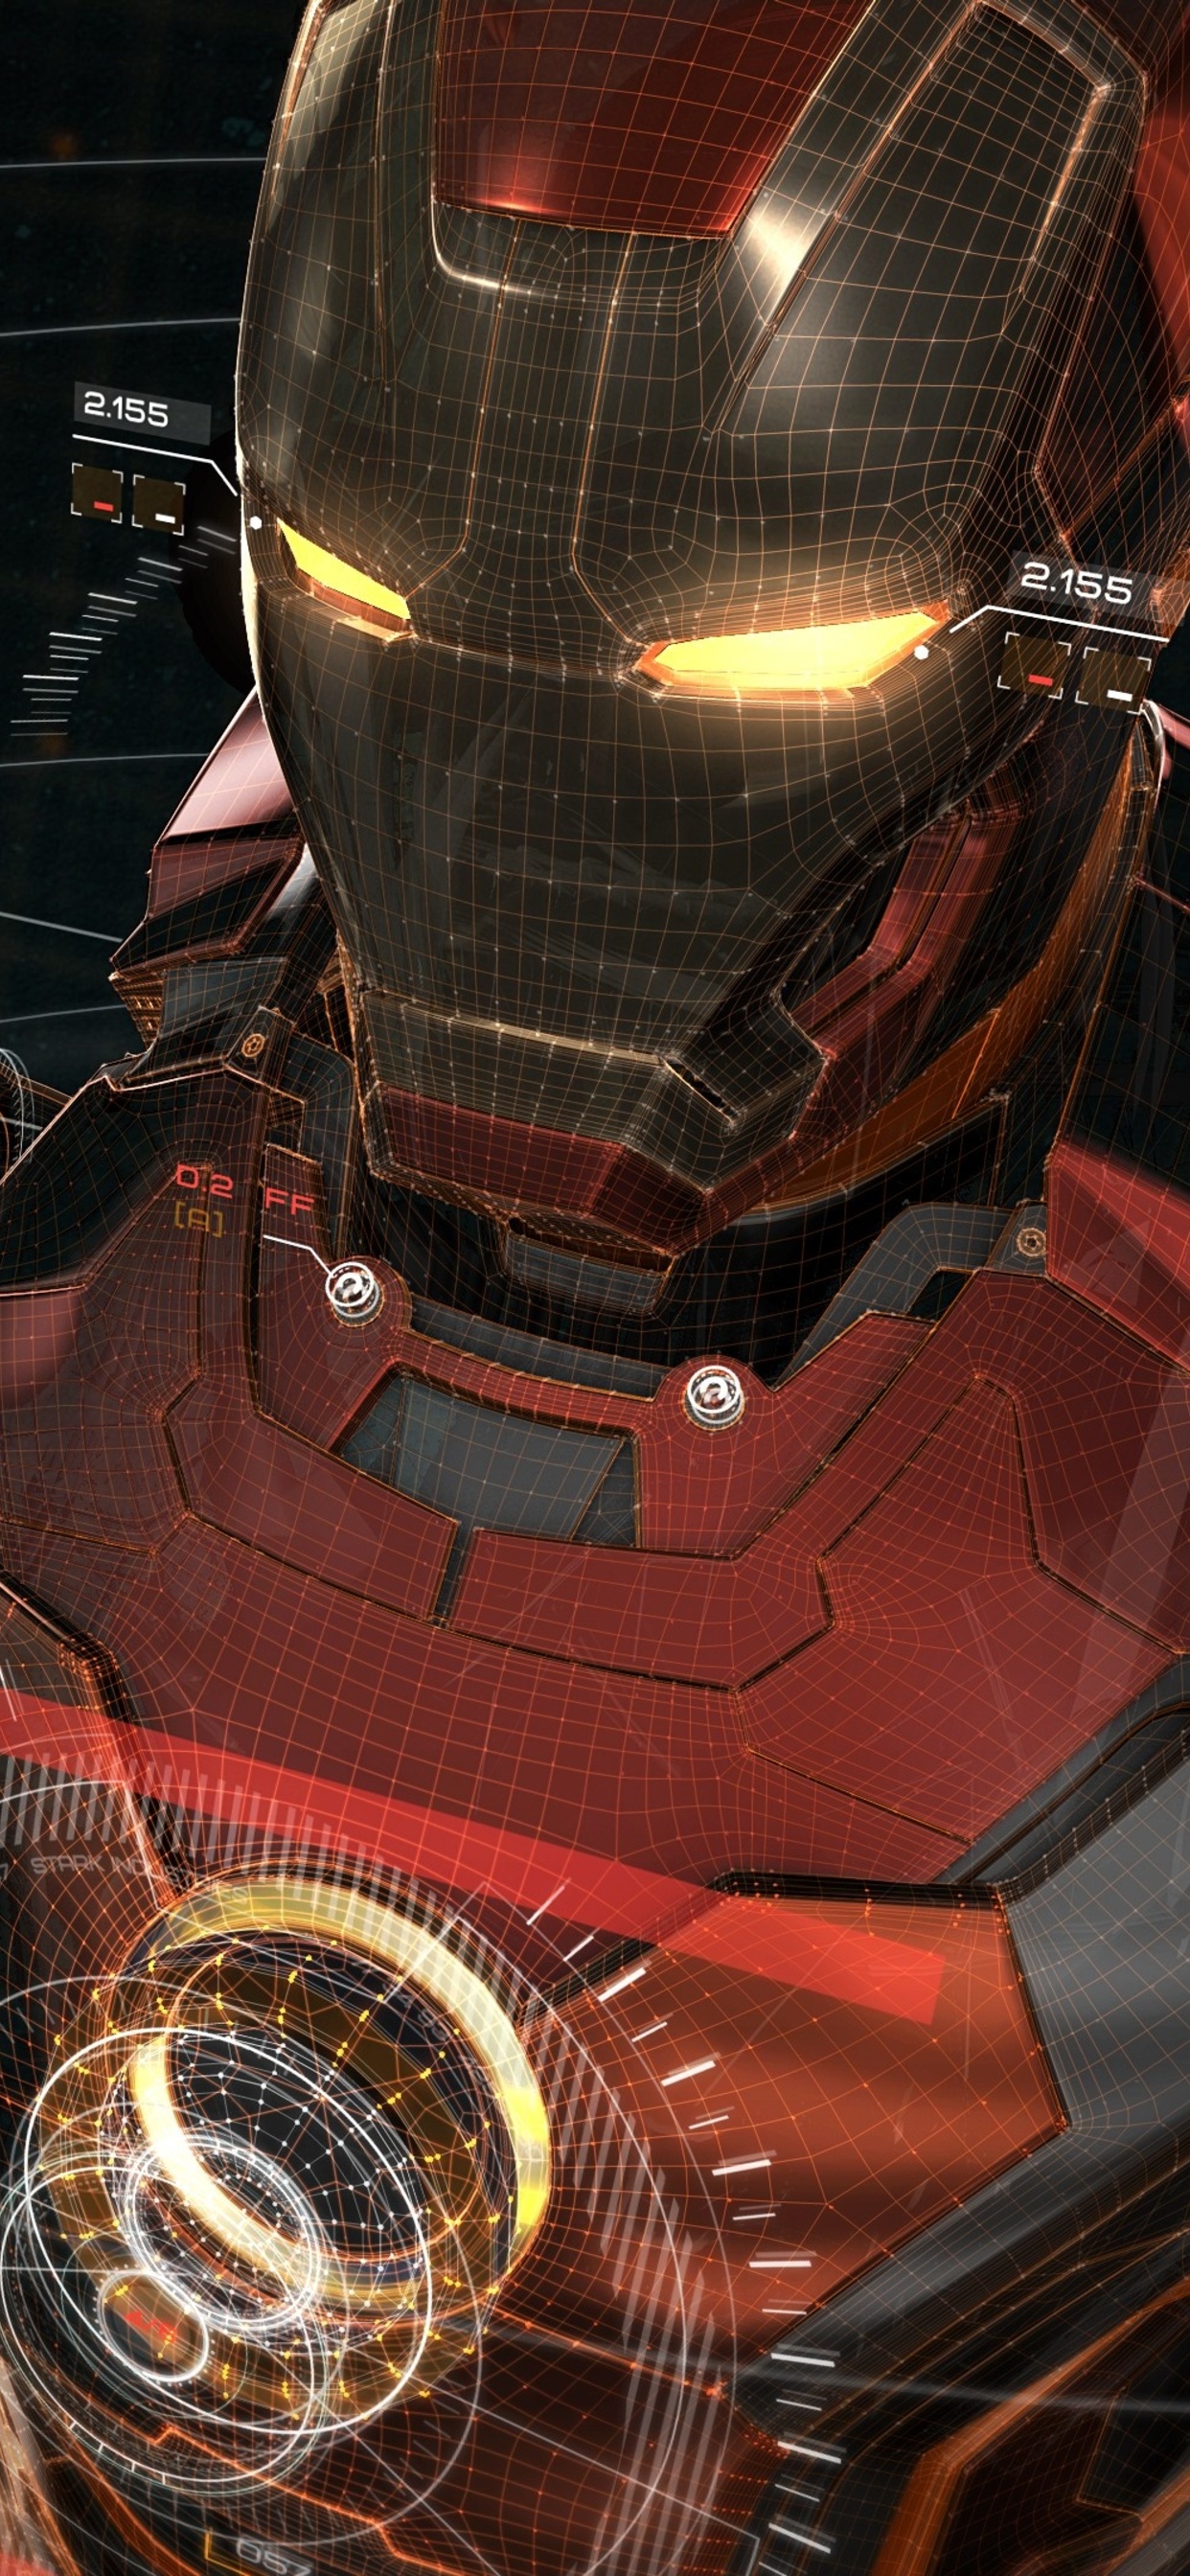 Iphone Xs Max Iron Man Image - Phone Reviews, News, Opinions About Phone